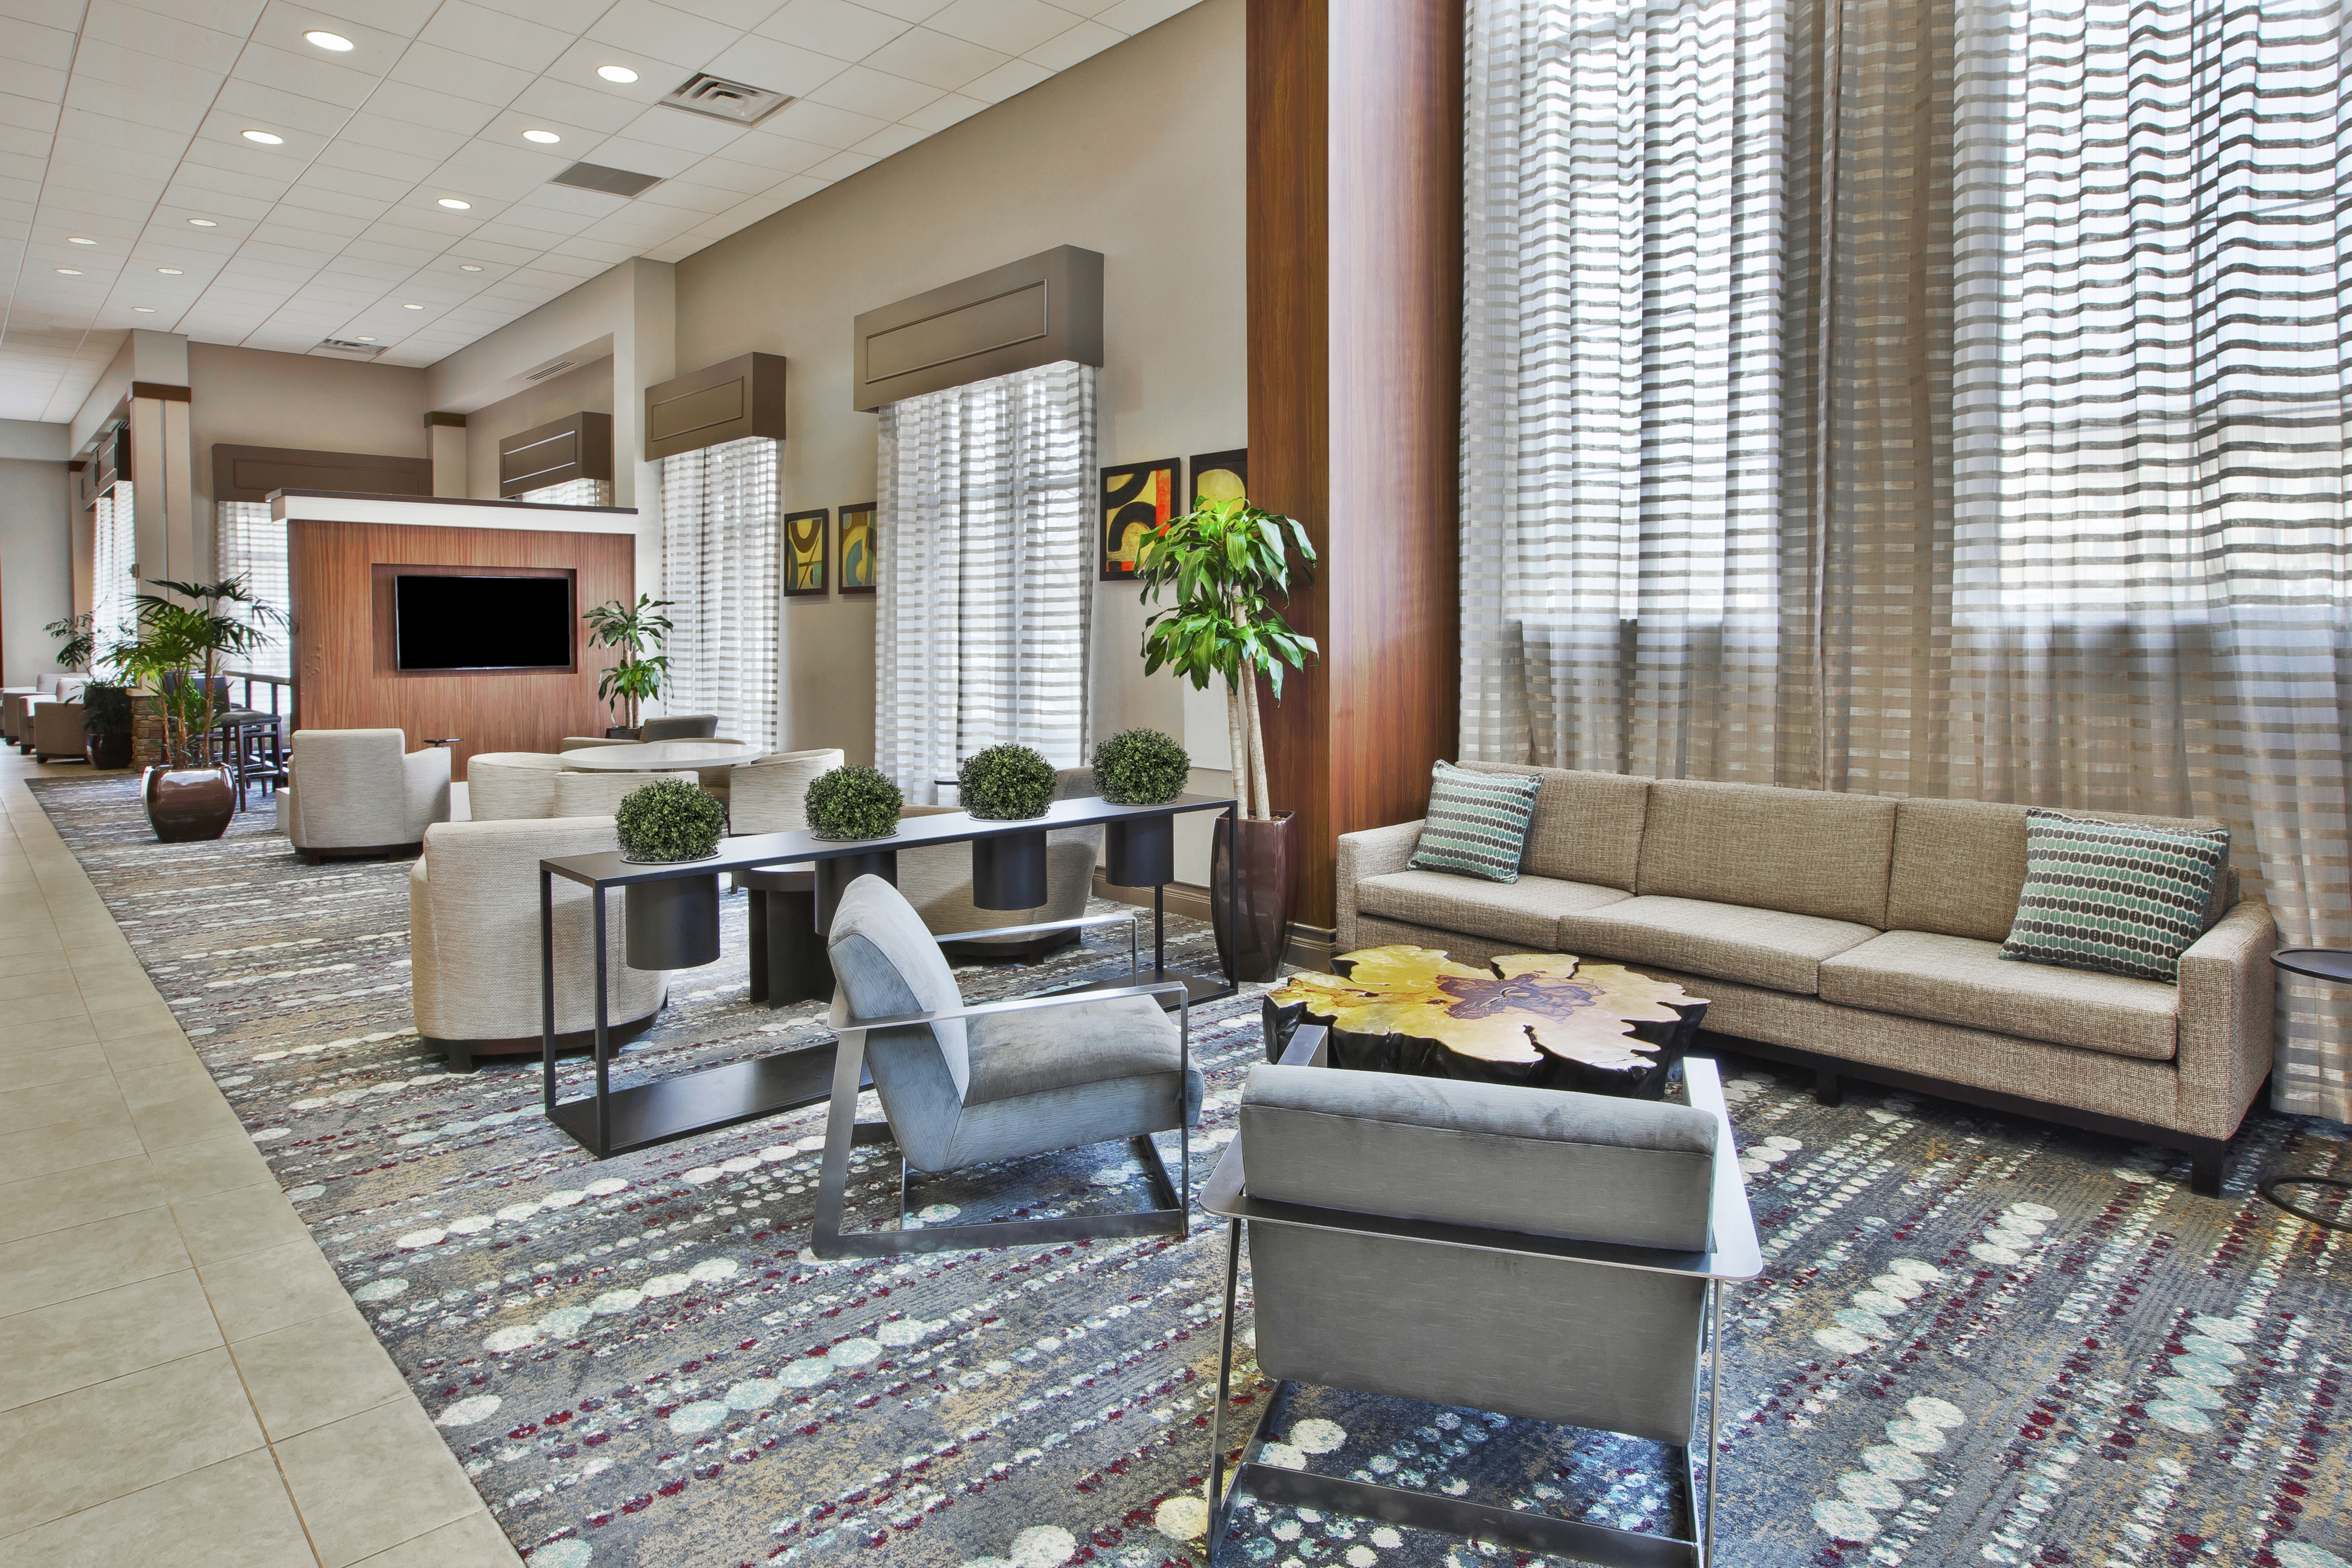 TV, Soft Seating, Plants, and Windows With Sheer Drapes in Hotel Lobby